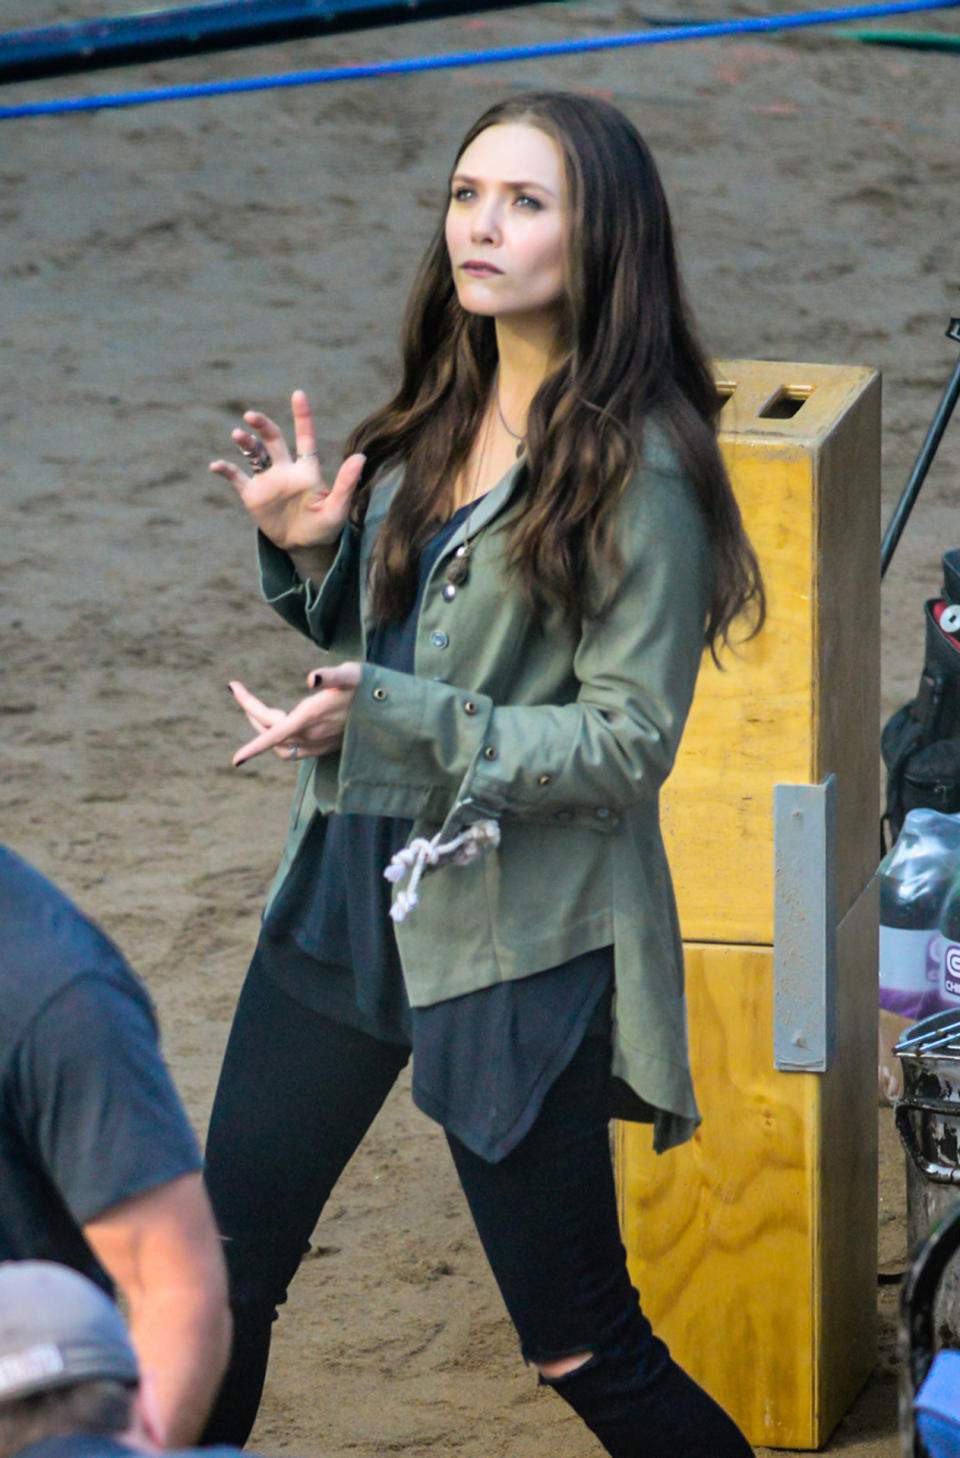 First sighting of Elizabeth Olsen doing some Scarlet Witch magic on the 'Civil War’ set on May 20.